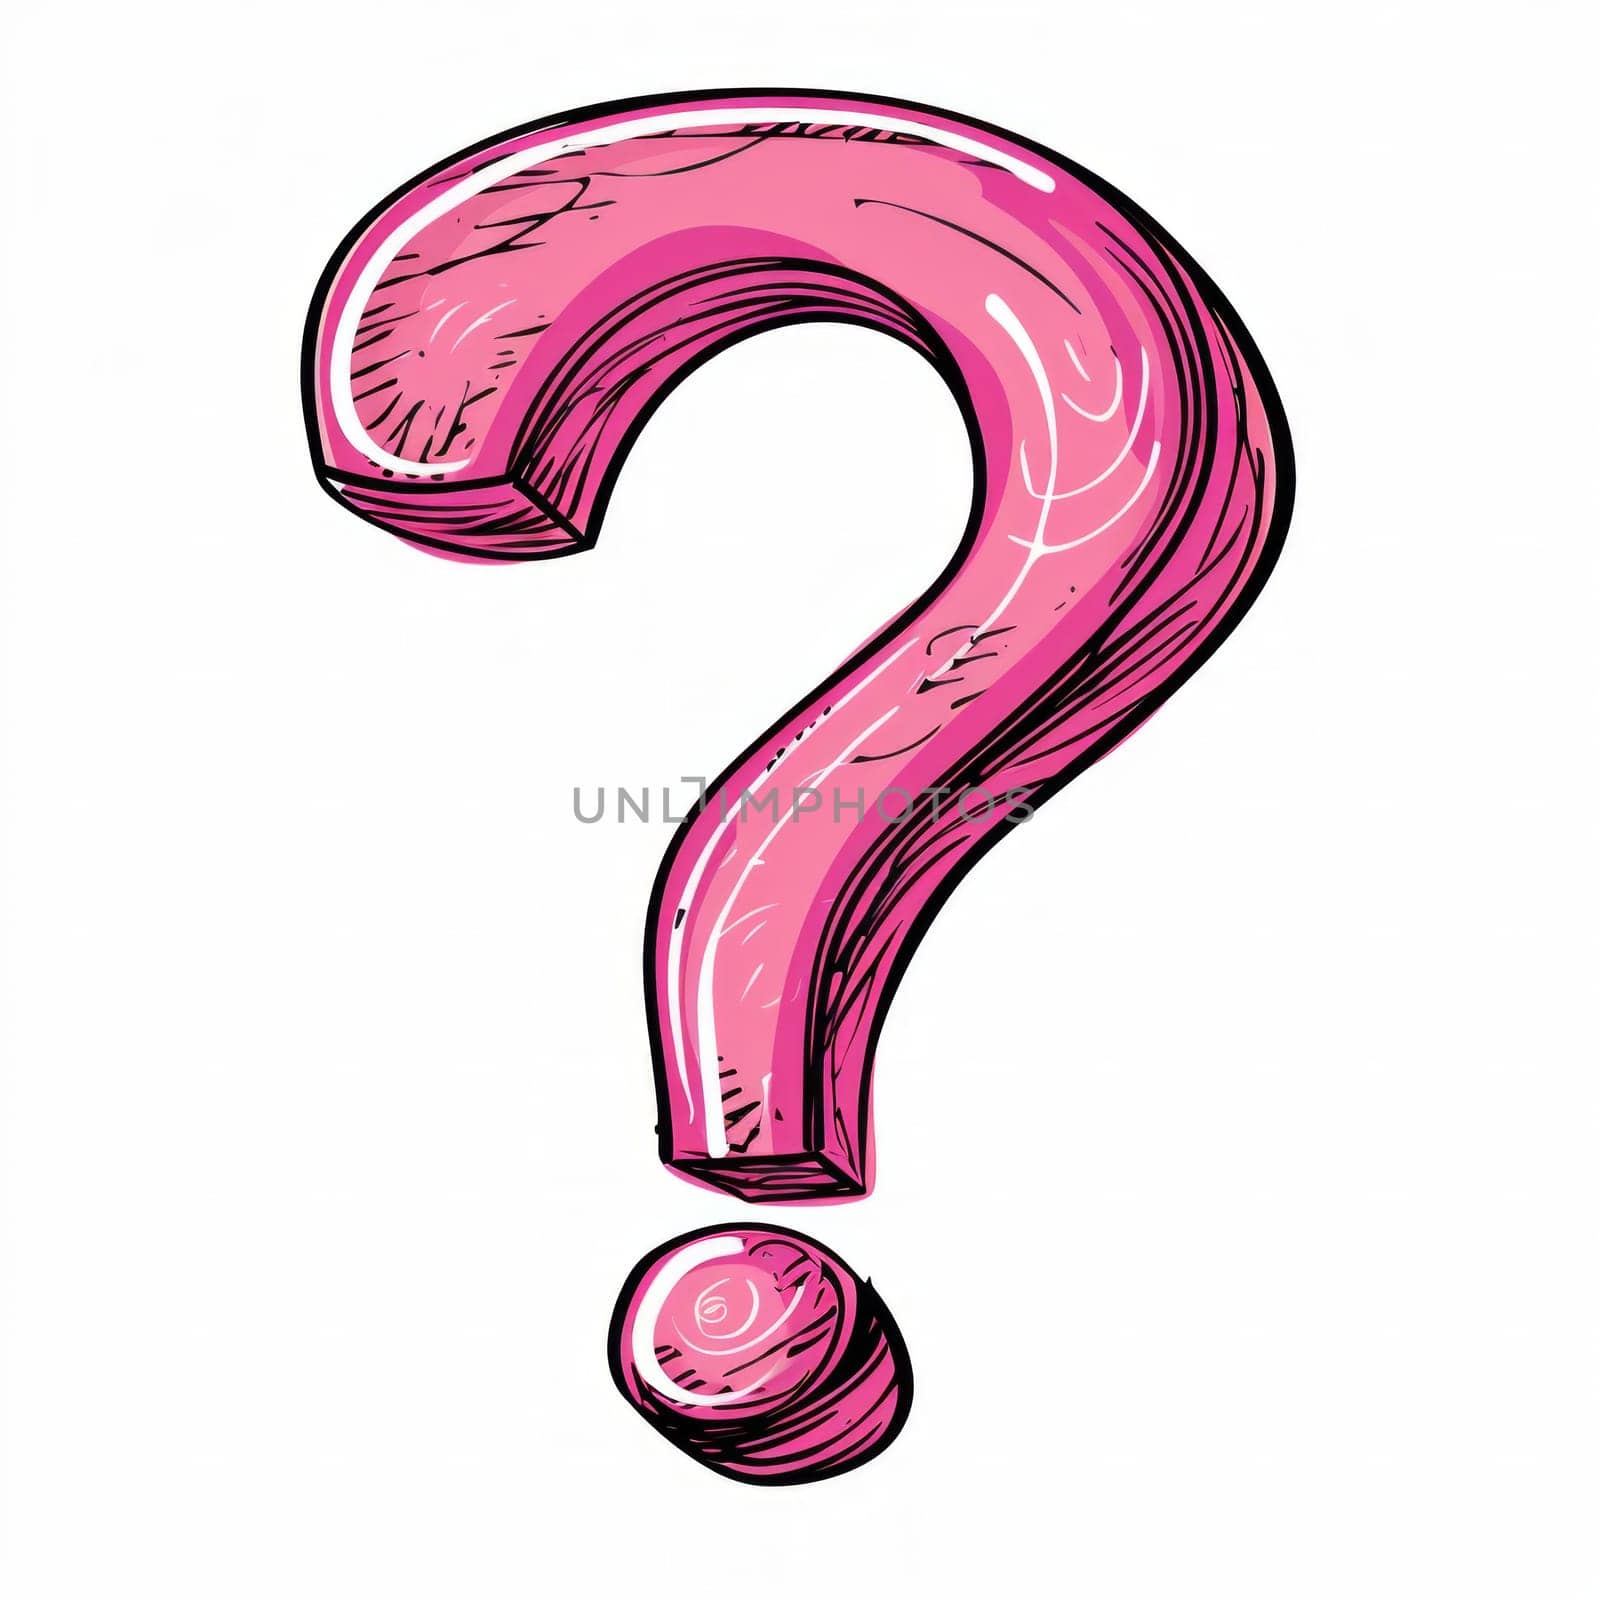 Pink question mark on a white background, cartoon style.